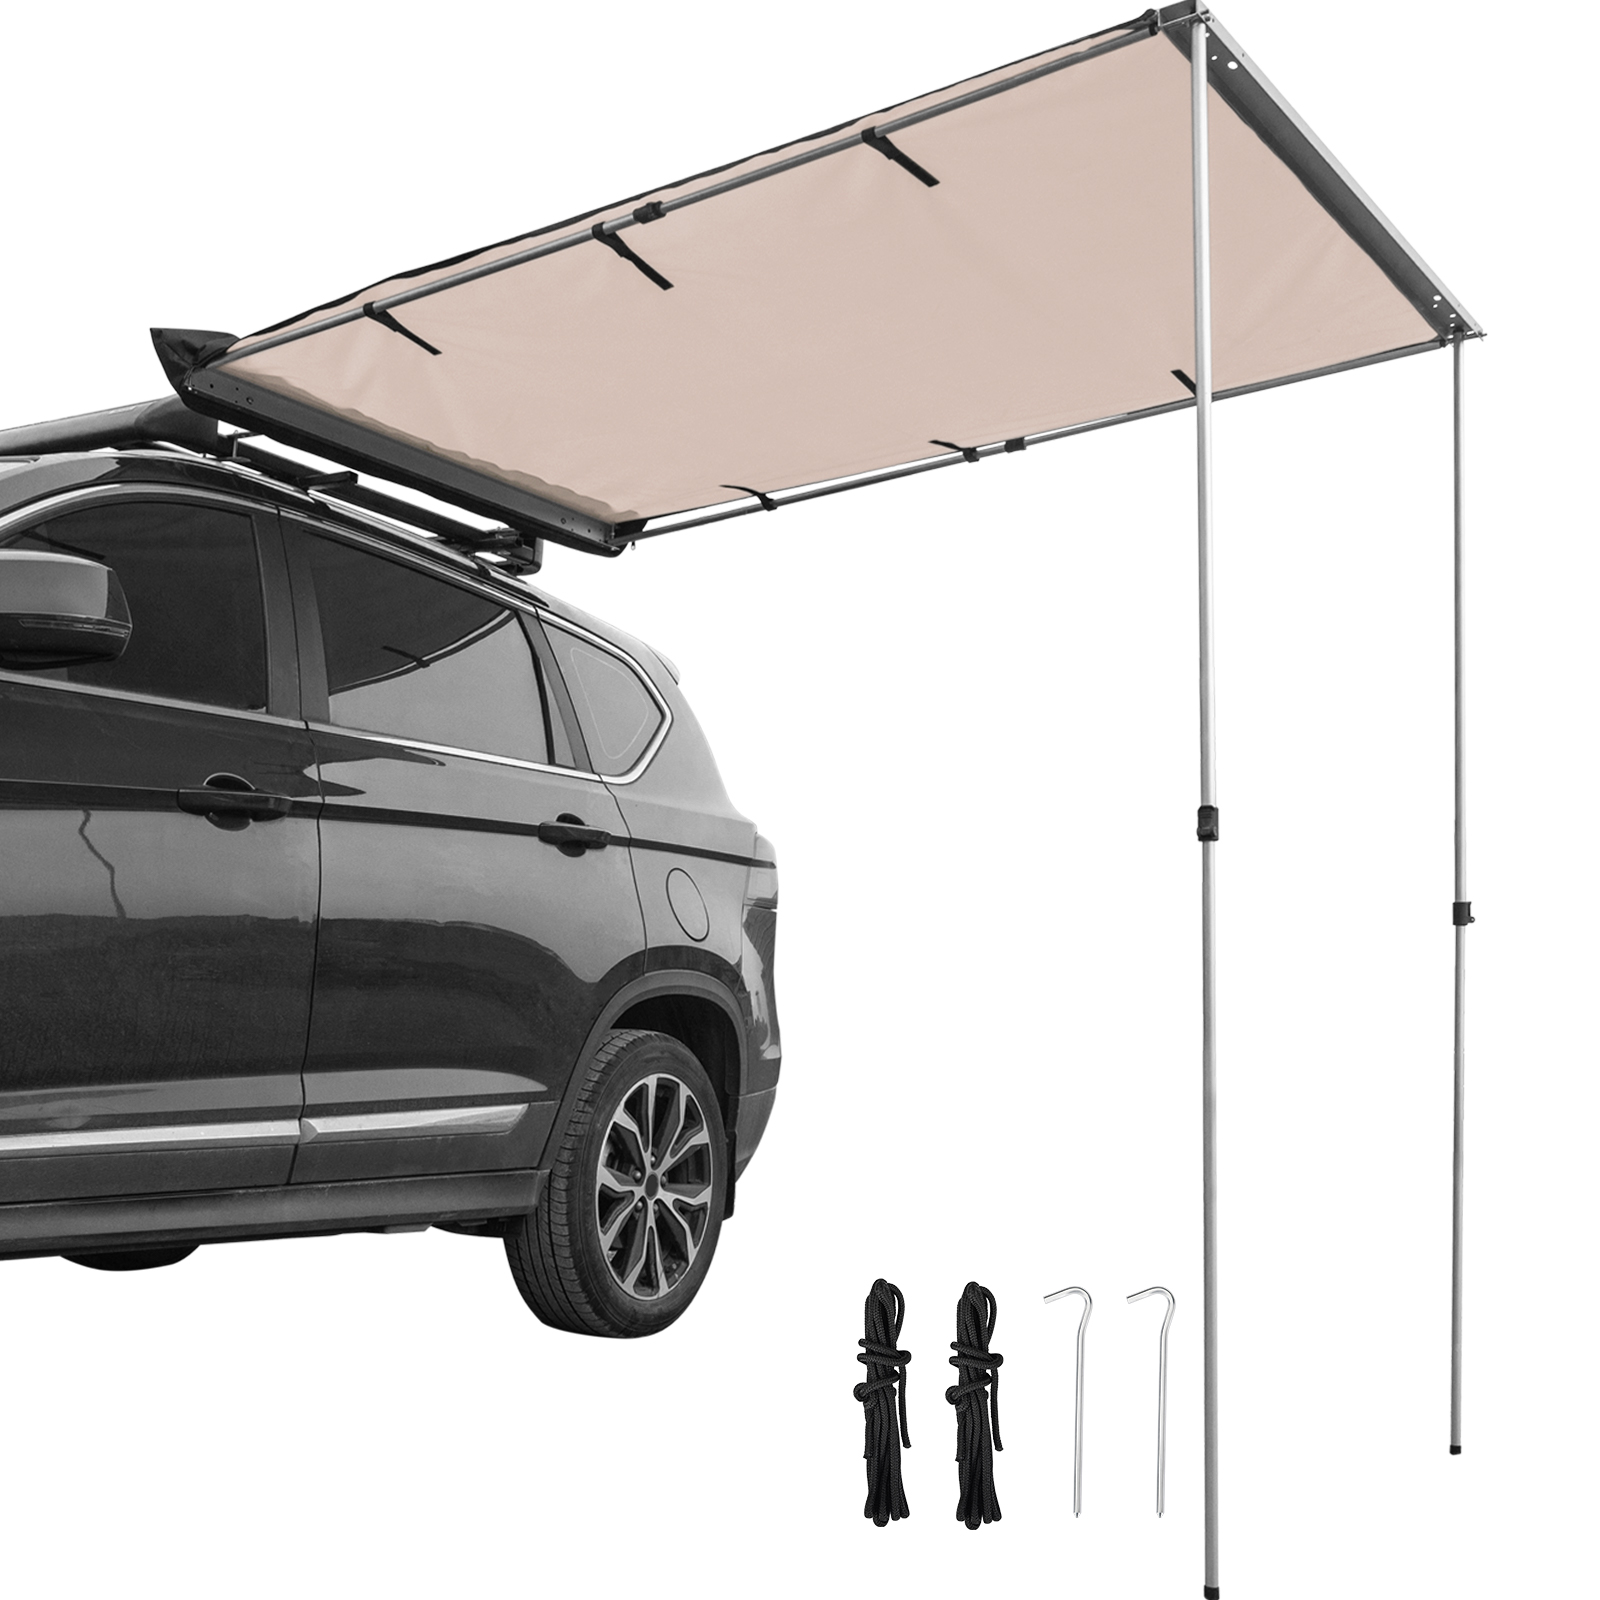 VEVOR Car Awning Car Tent Retractable Waterproof SUV Rooftop Sand 7.6'x8.2' от Vevor Many GEOs